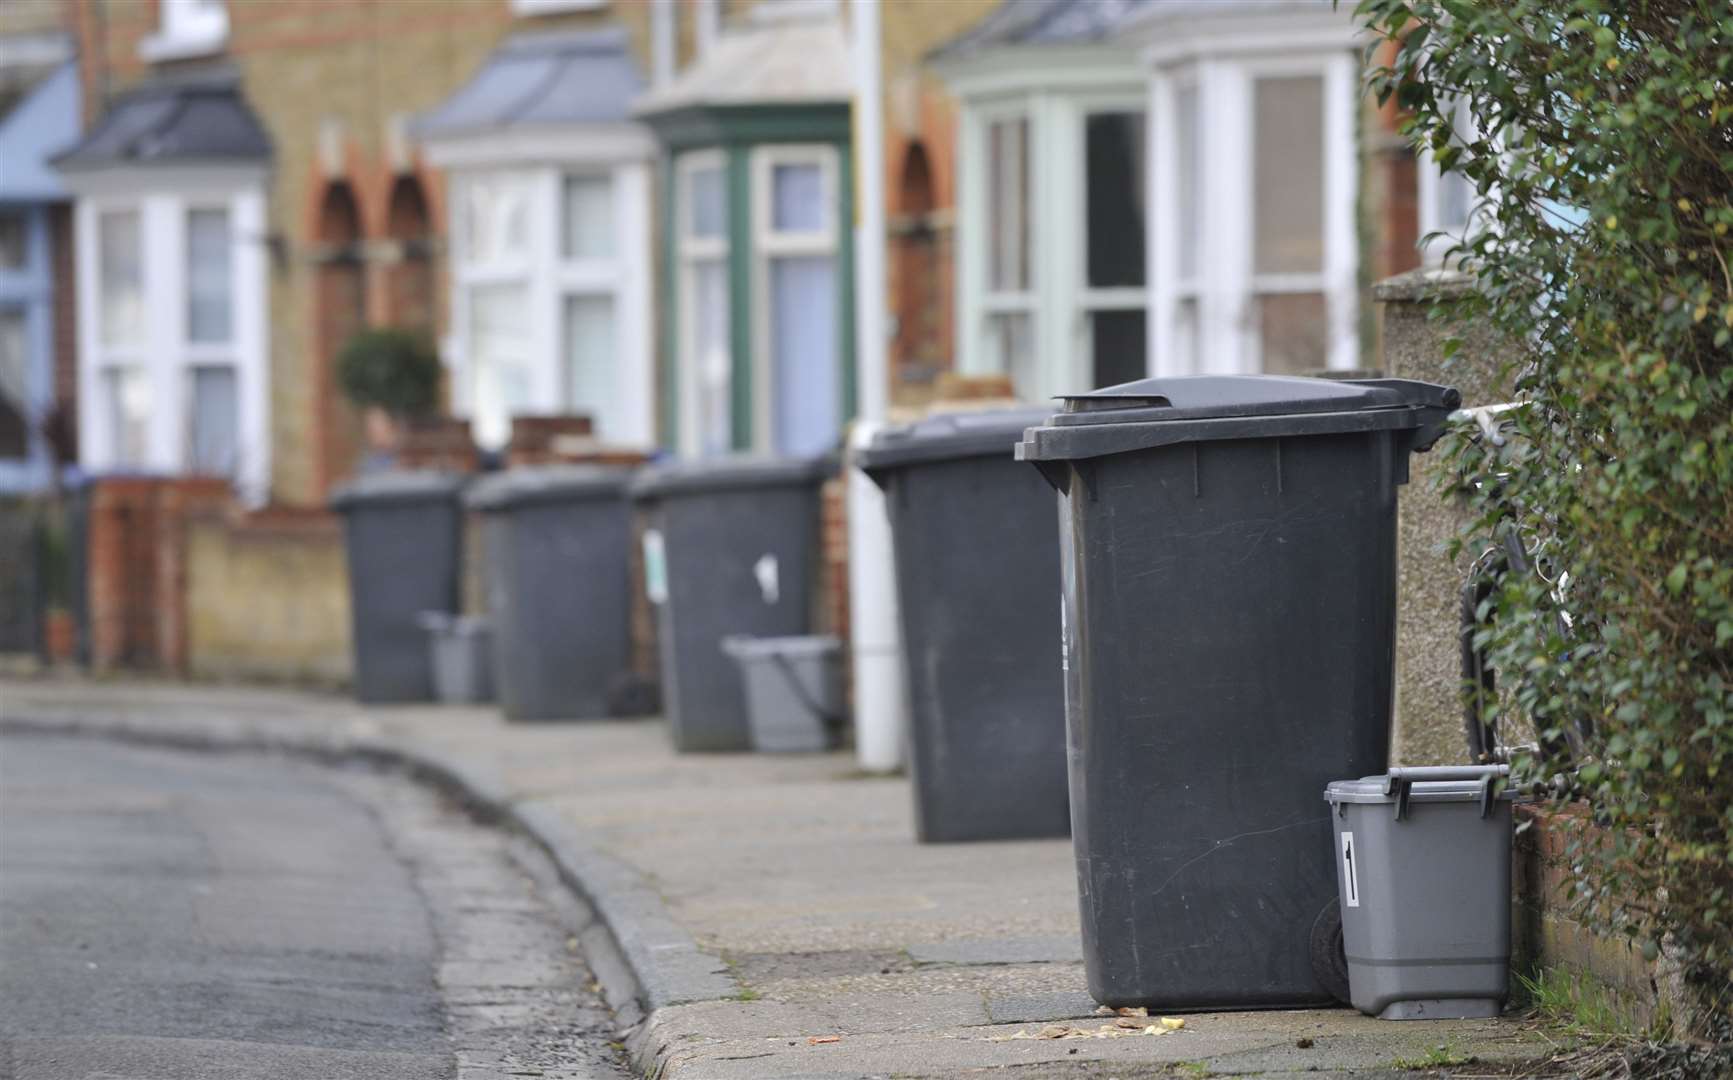 Some bin collections in Swale have been missed due to reduced numbers of staff